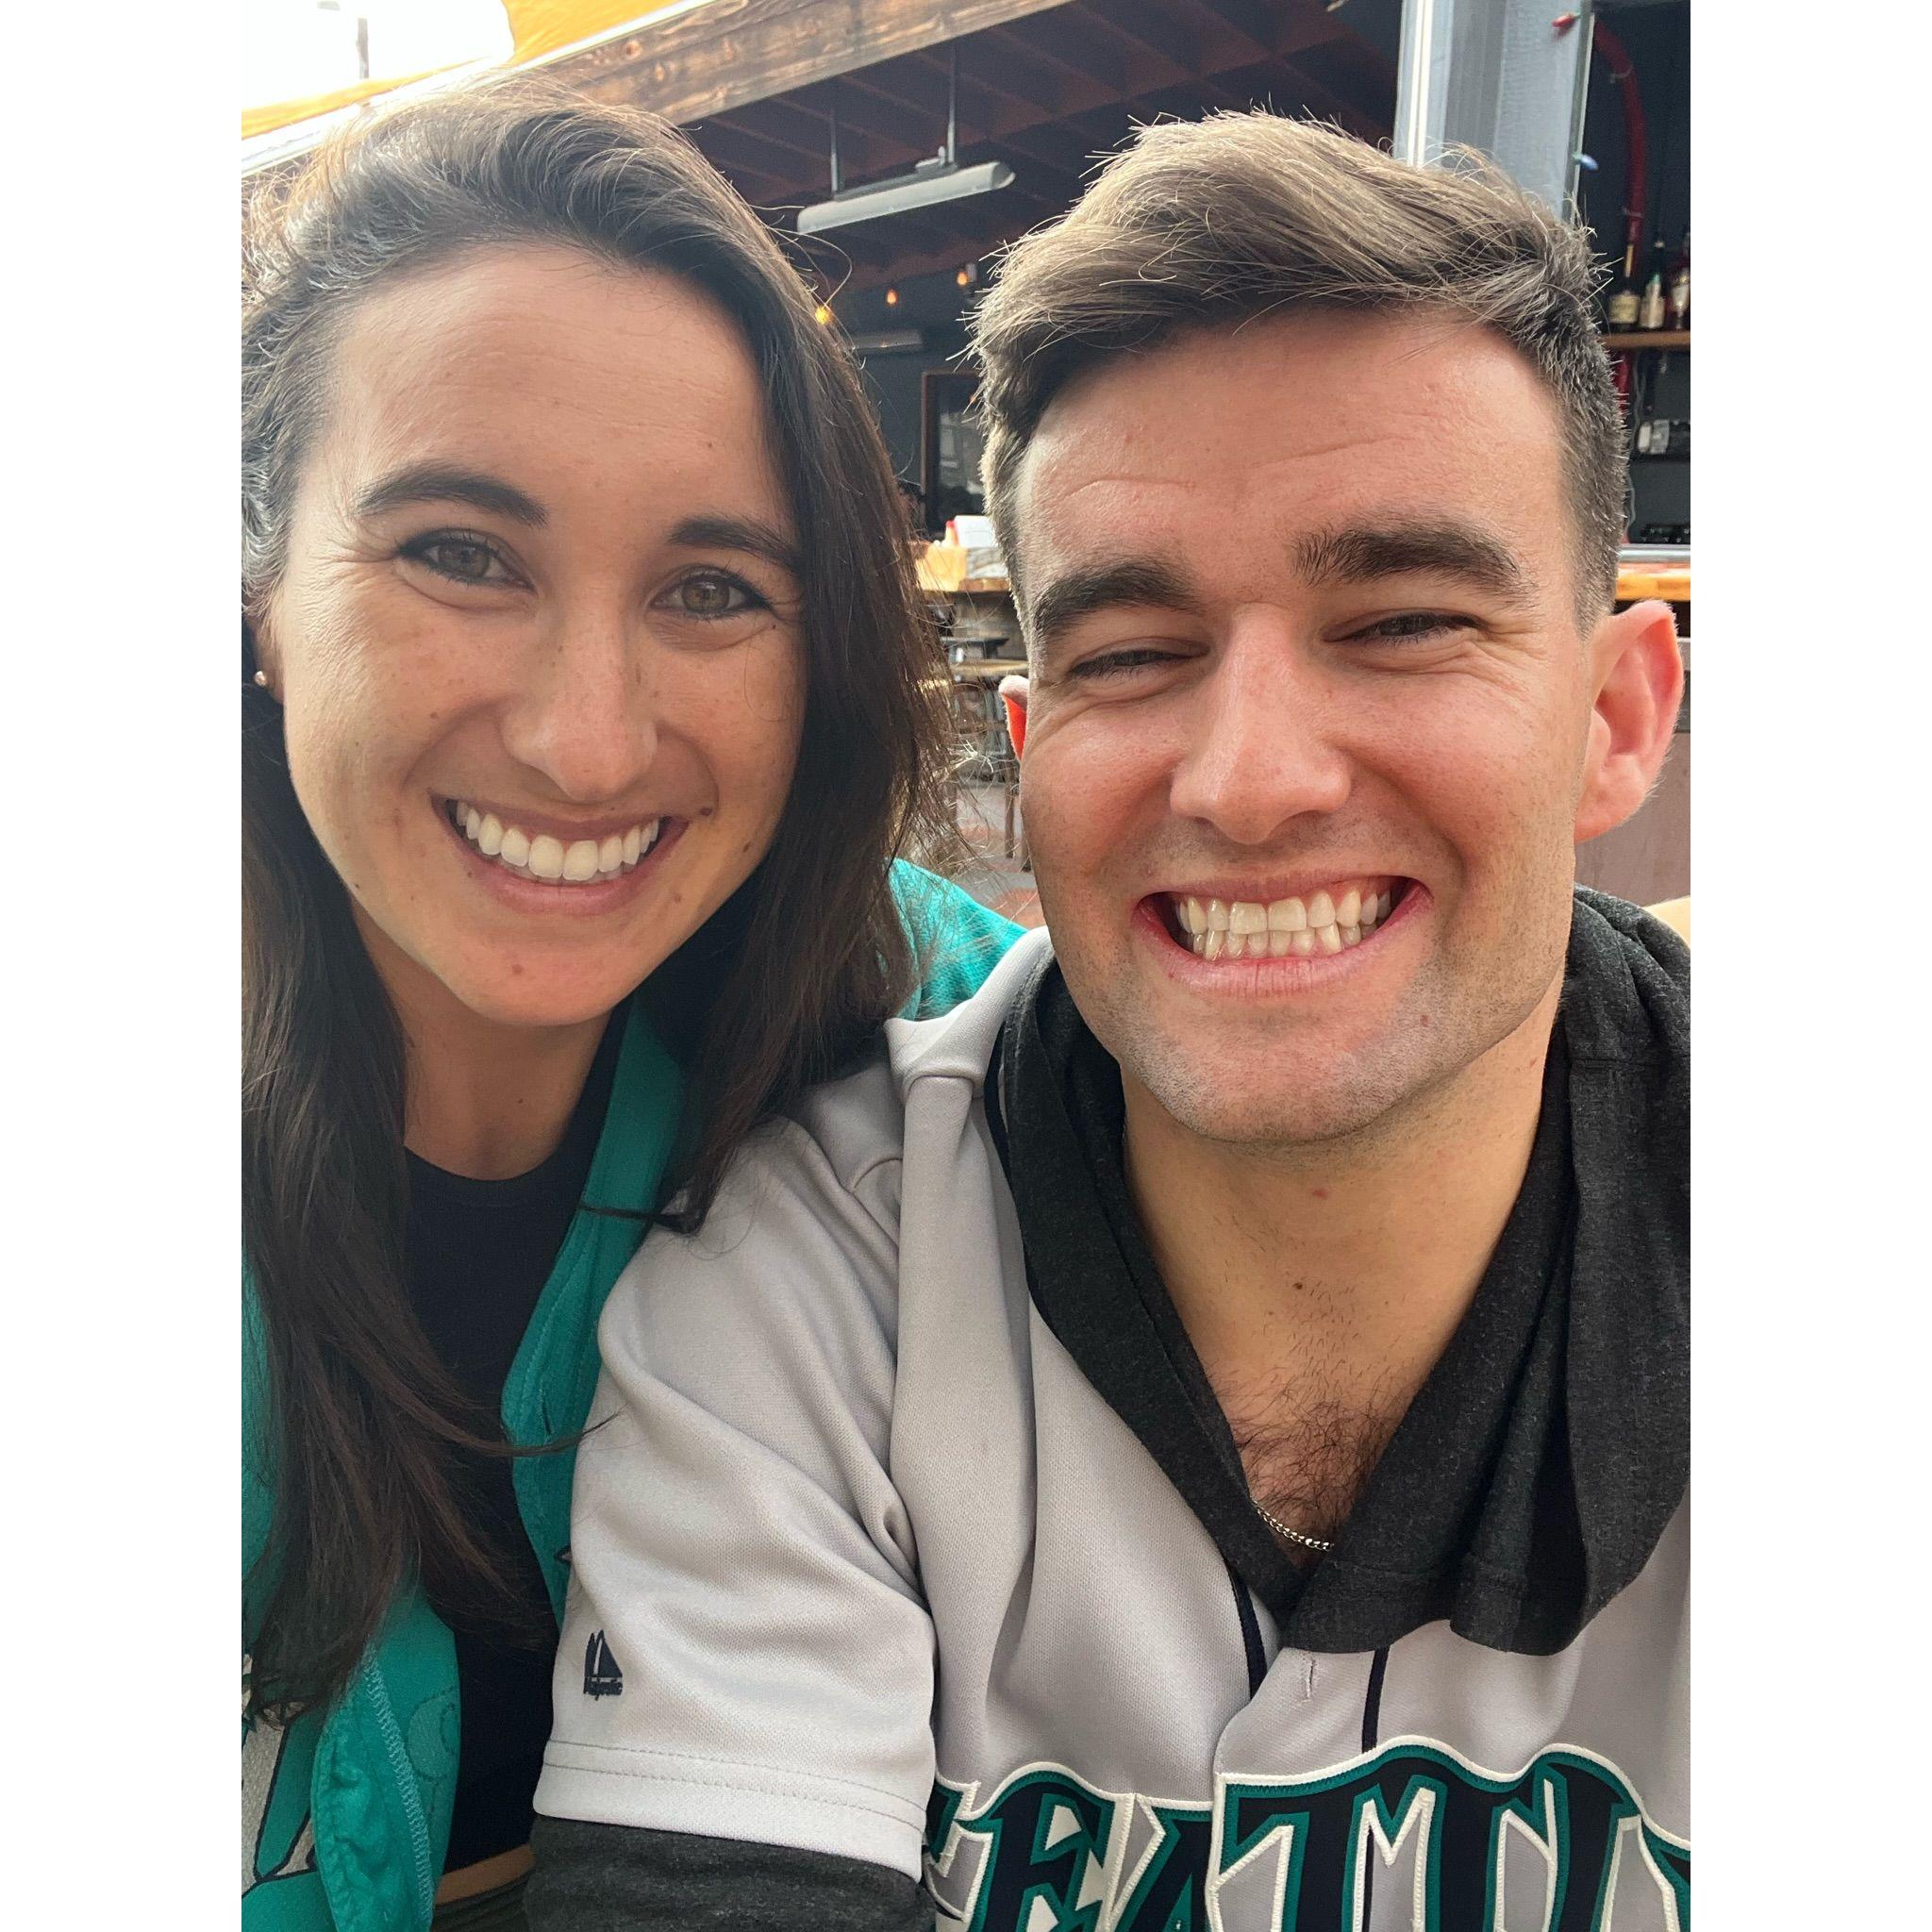 Big Seattle Mariners fans